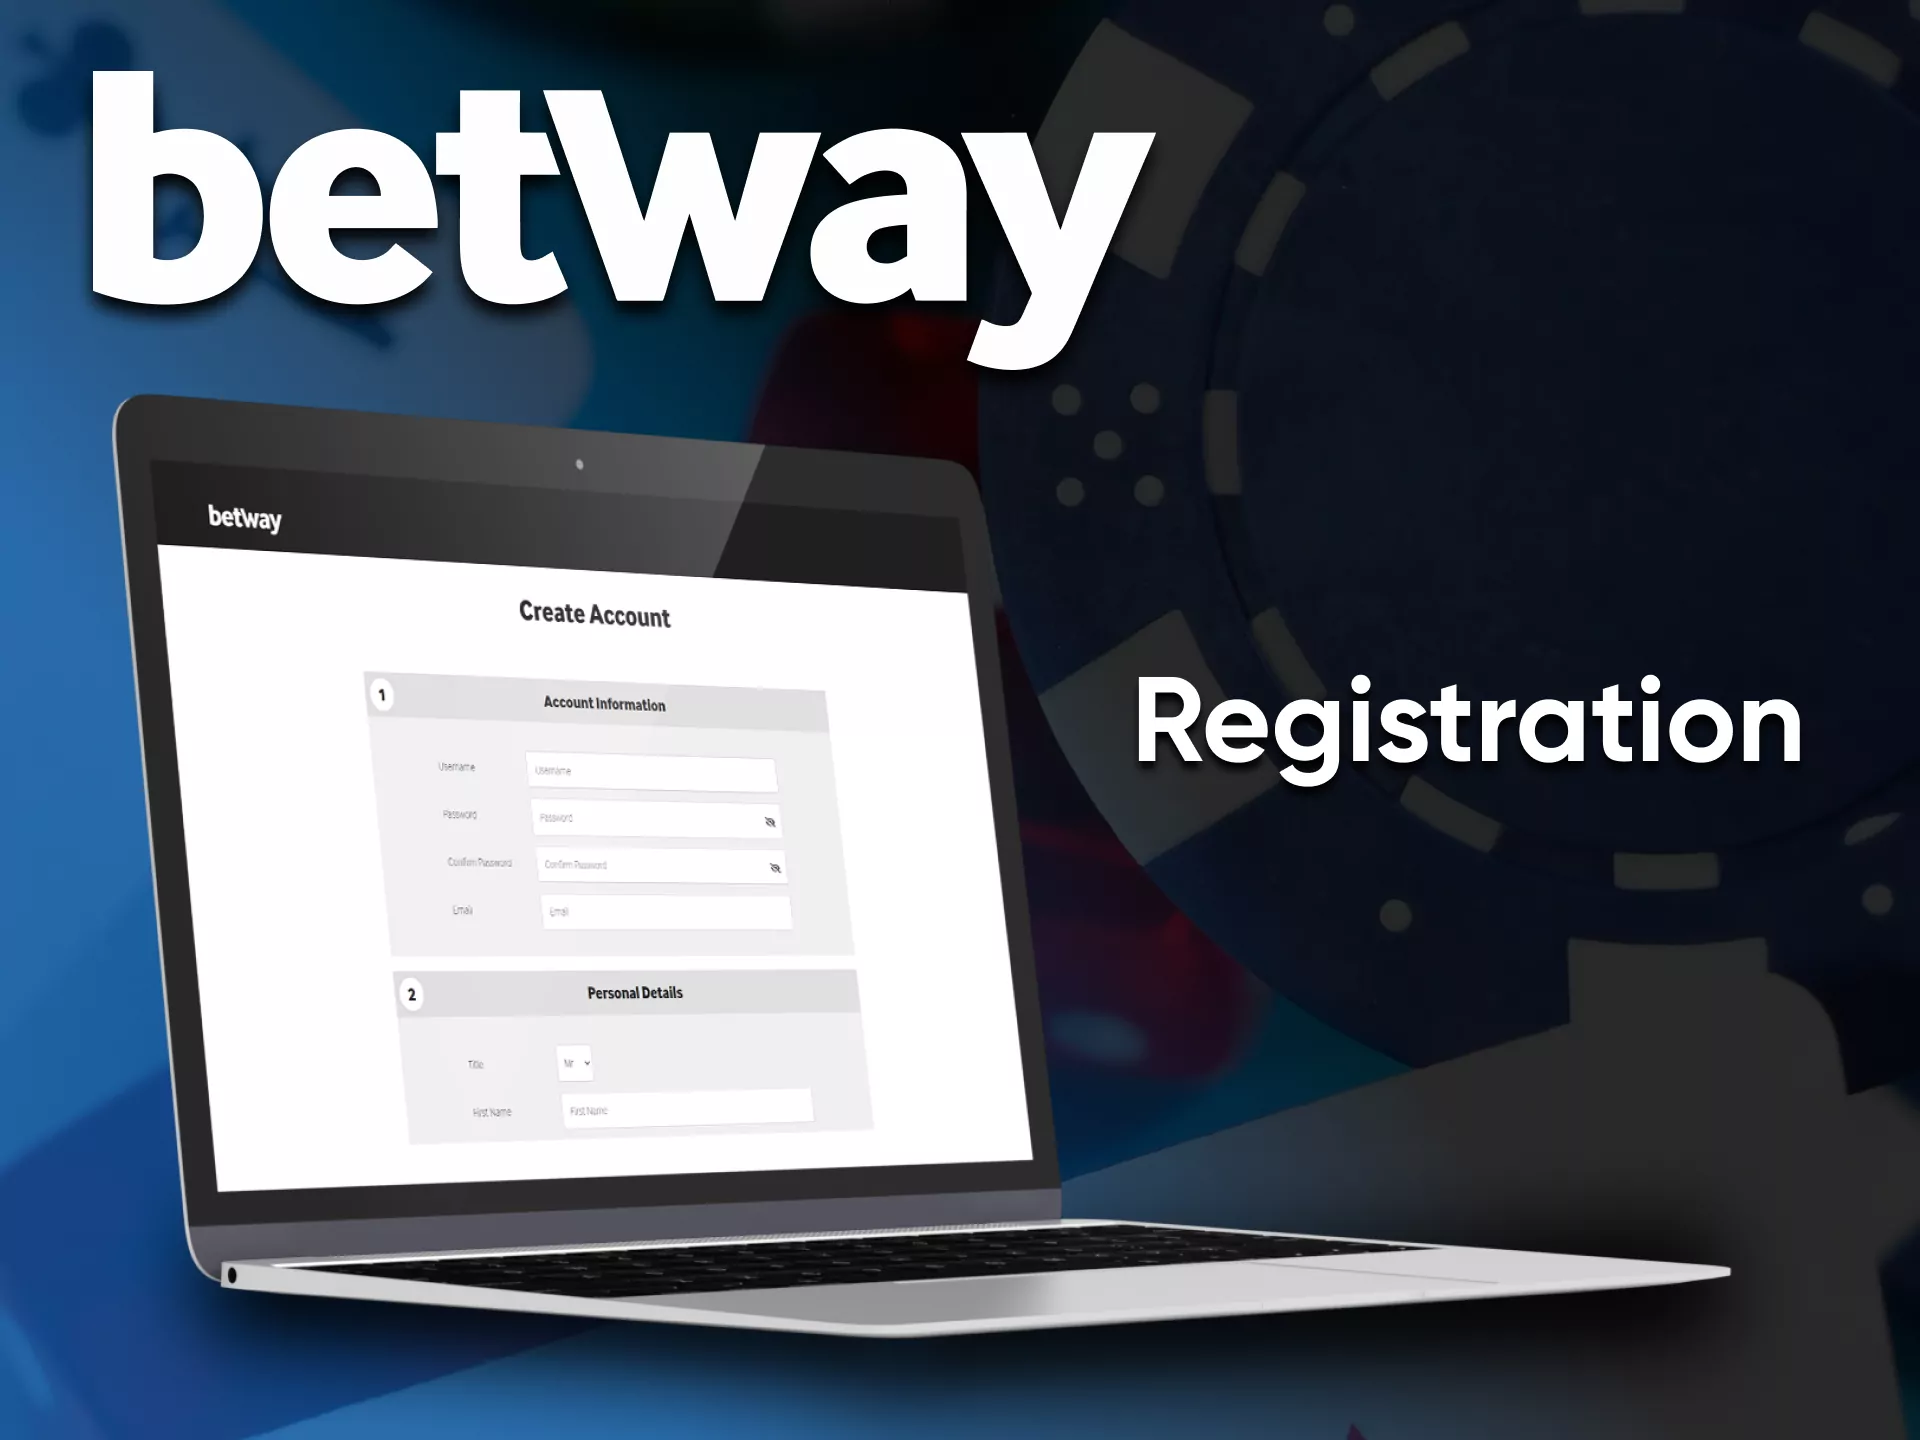 Create an account for the Betway casino game.